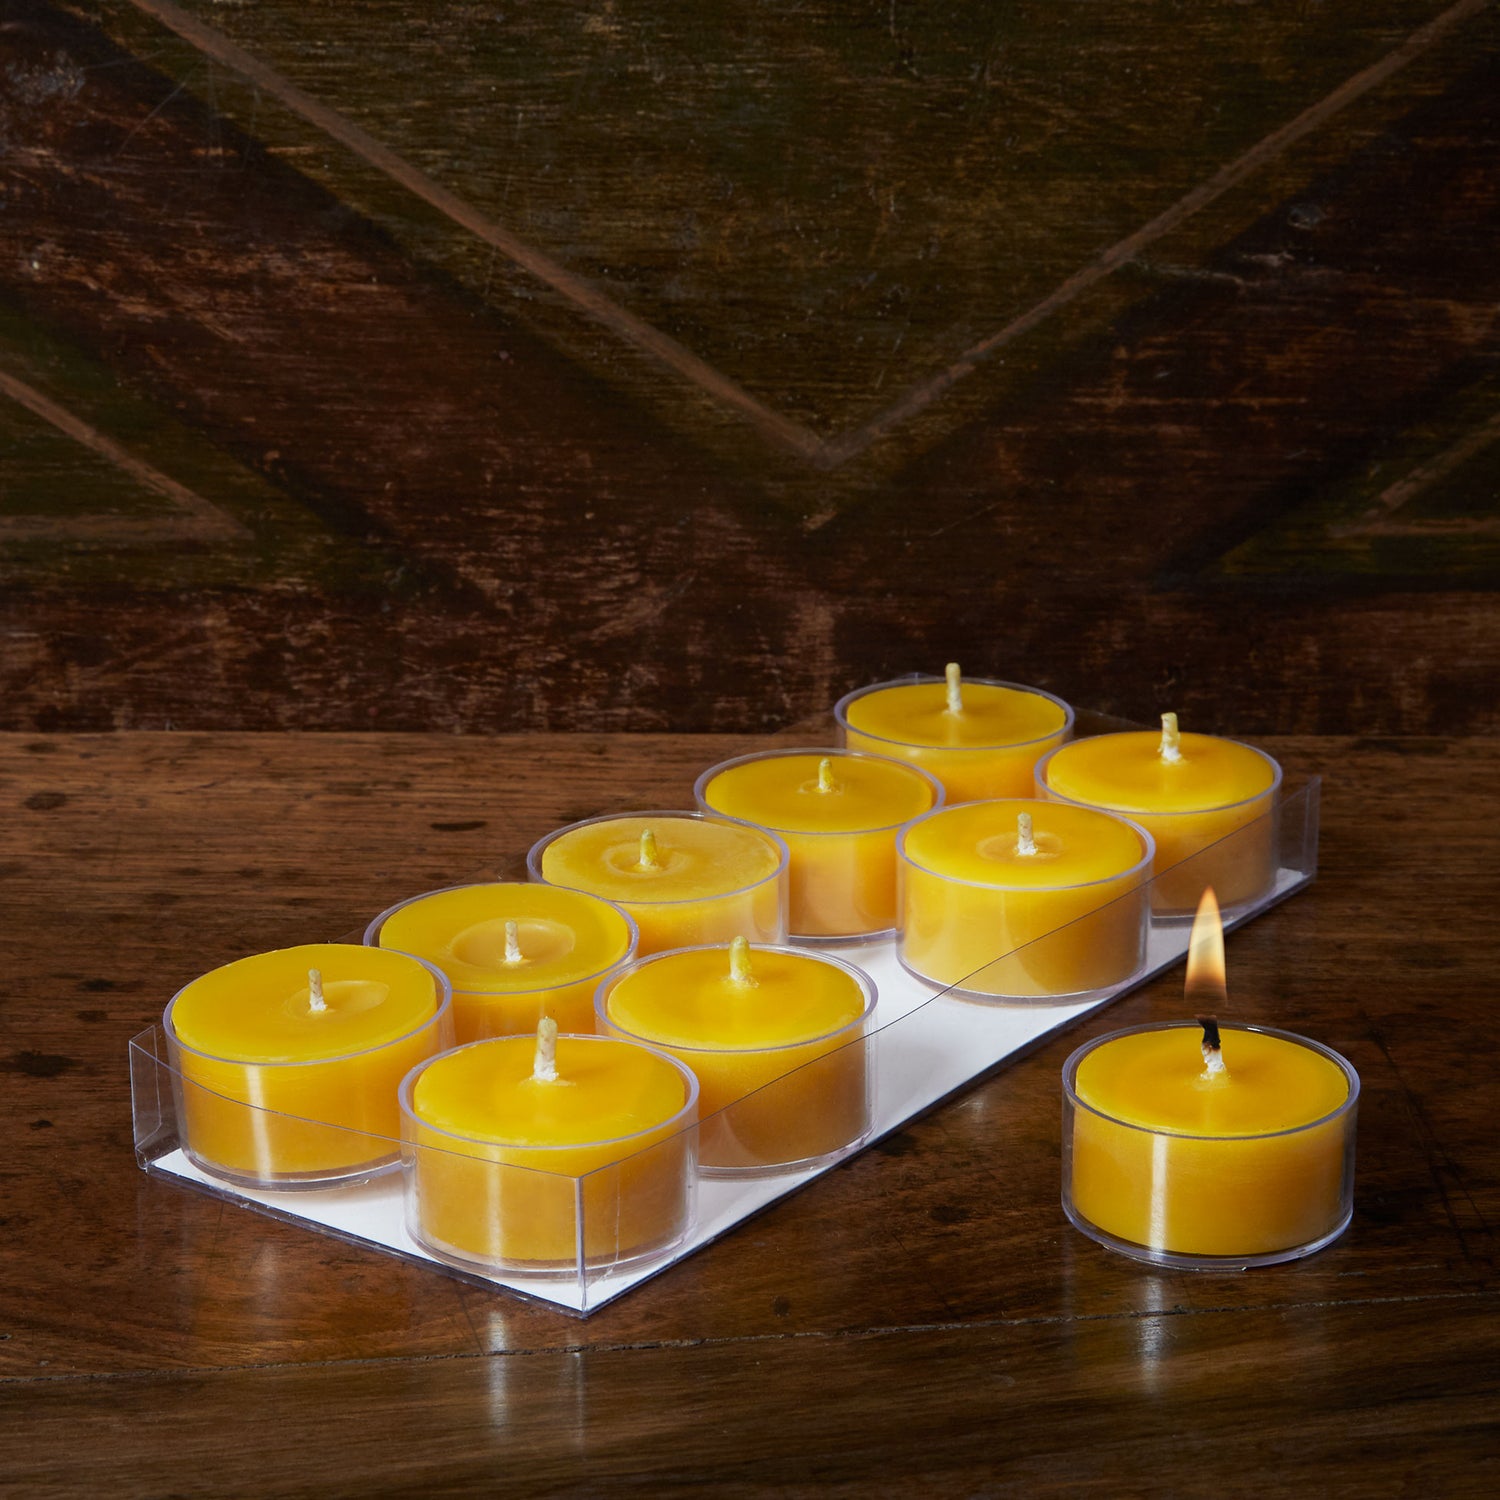 Smooth Cylinder Beeswax Candle 4.5 inch - Honey Pacifica